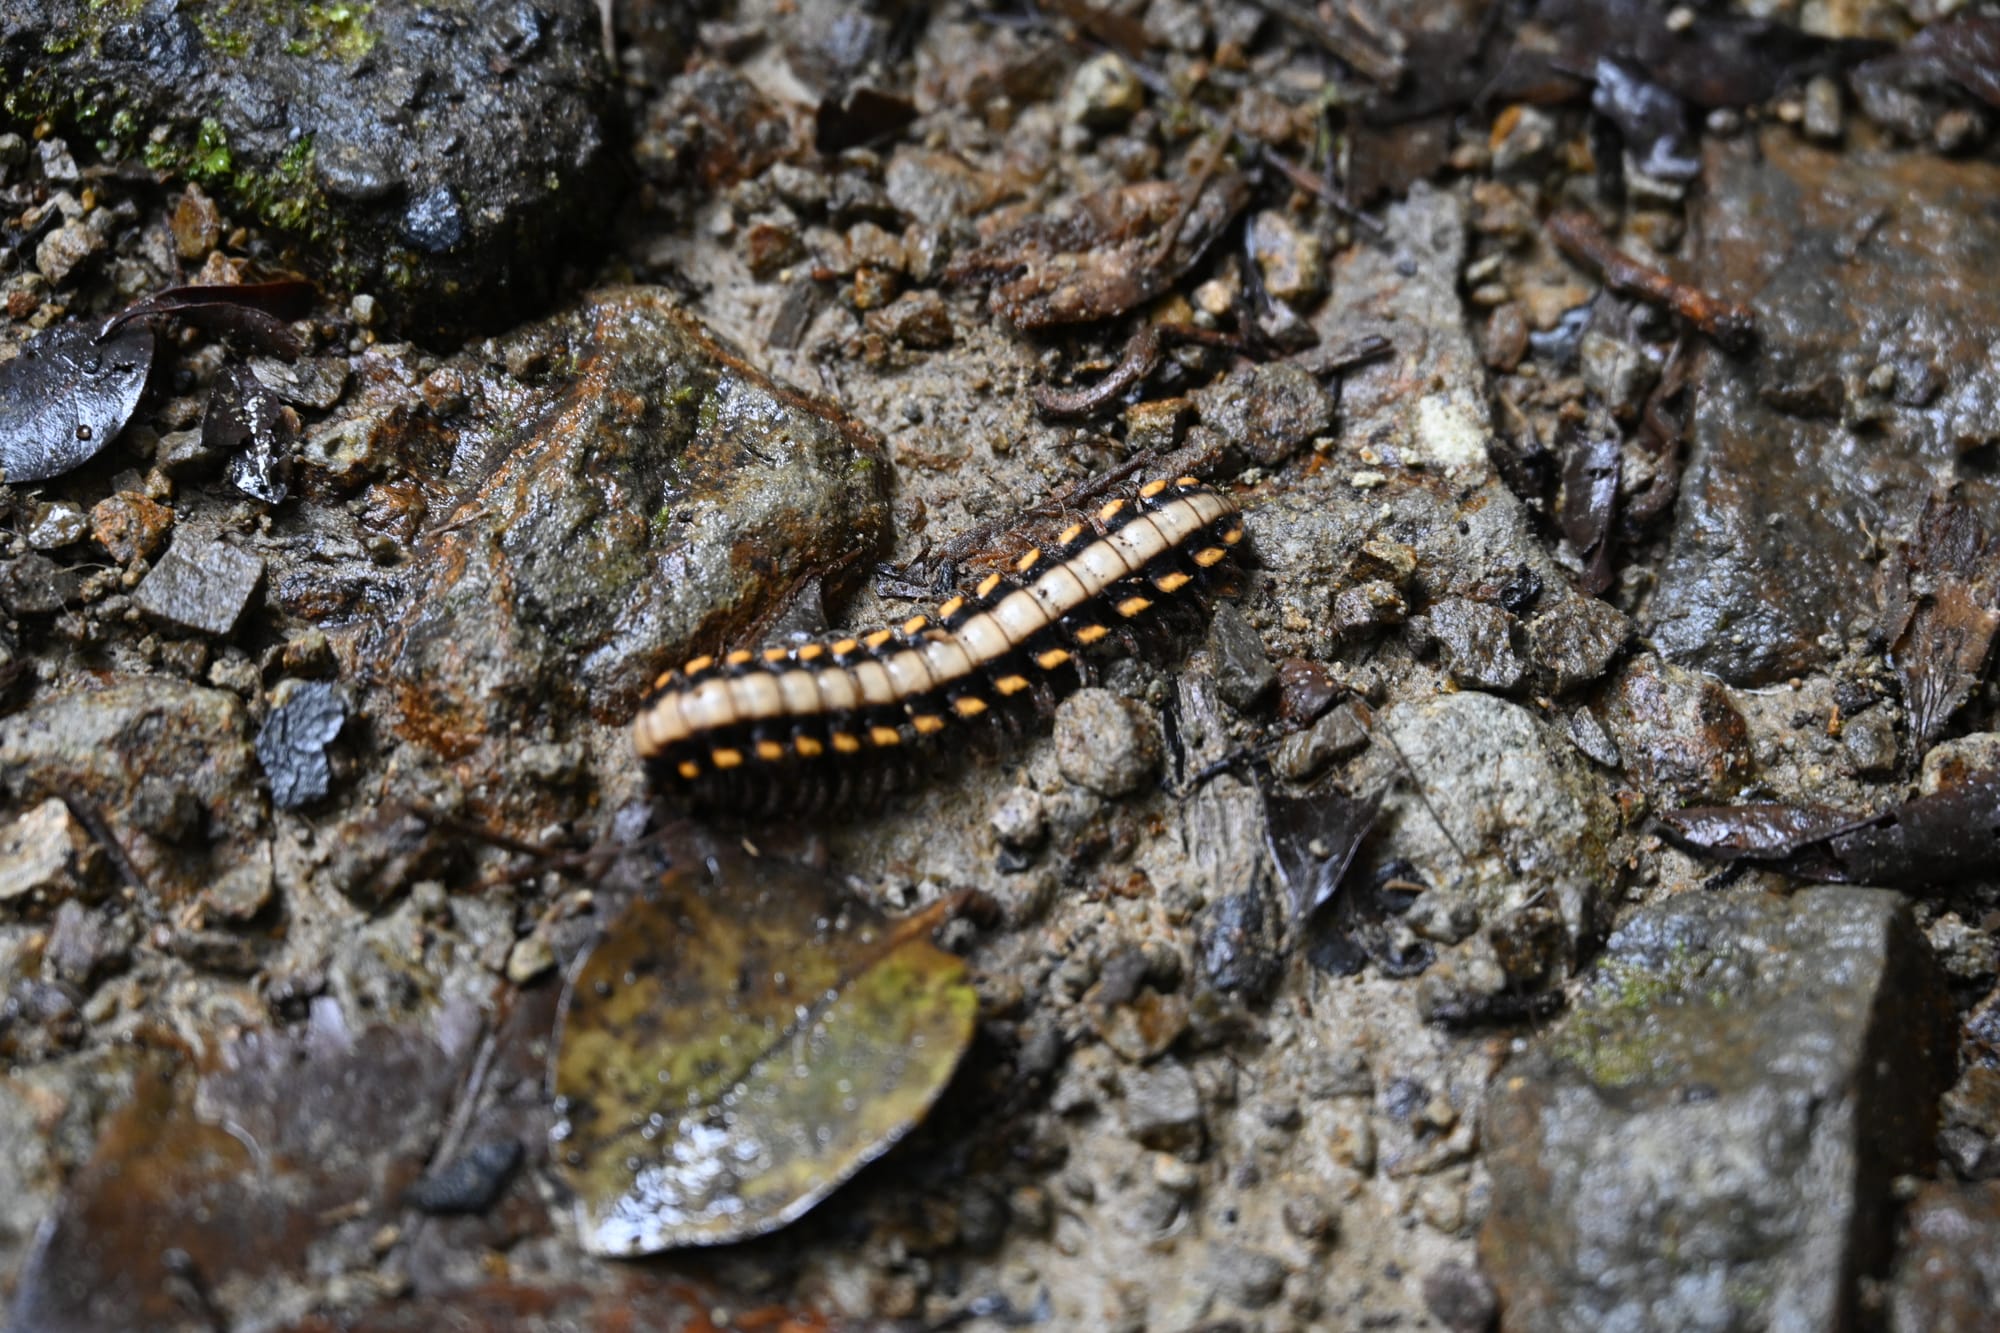 Close-up of a yellow and black millipede on a wet forest floor, surrounded by rocks and decaying leaves.